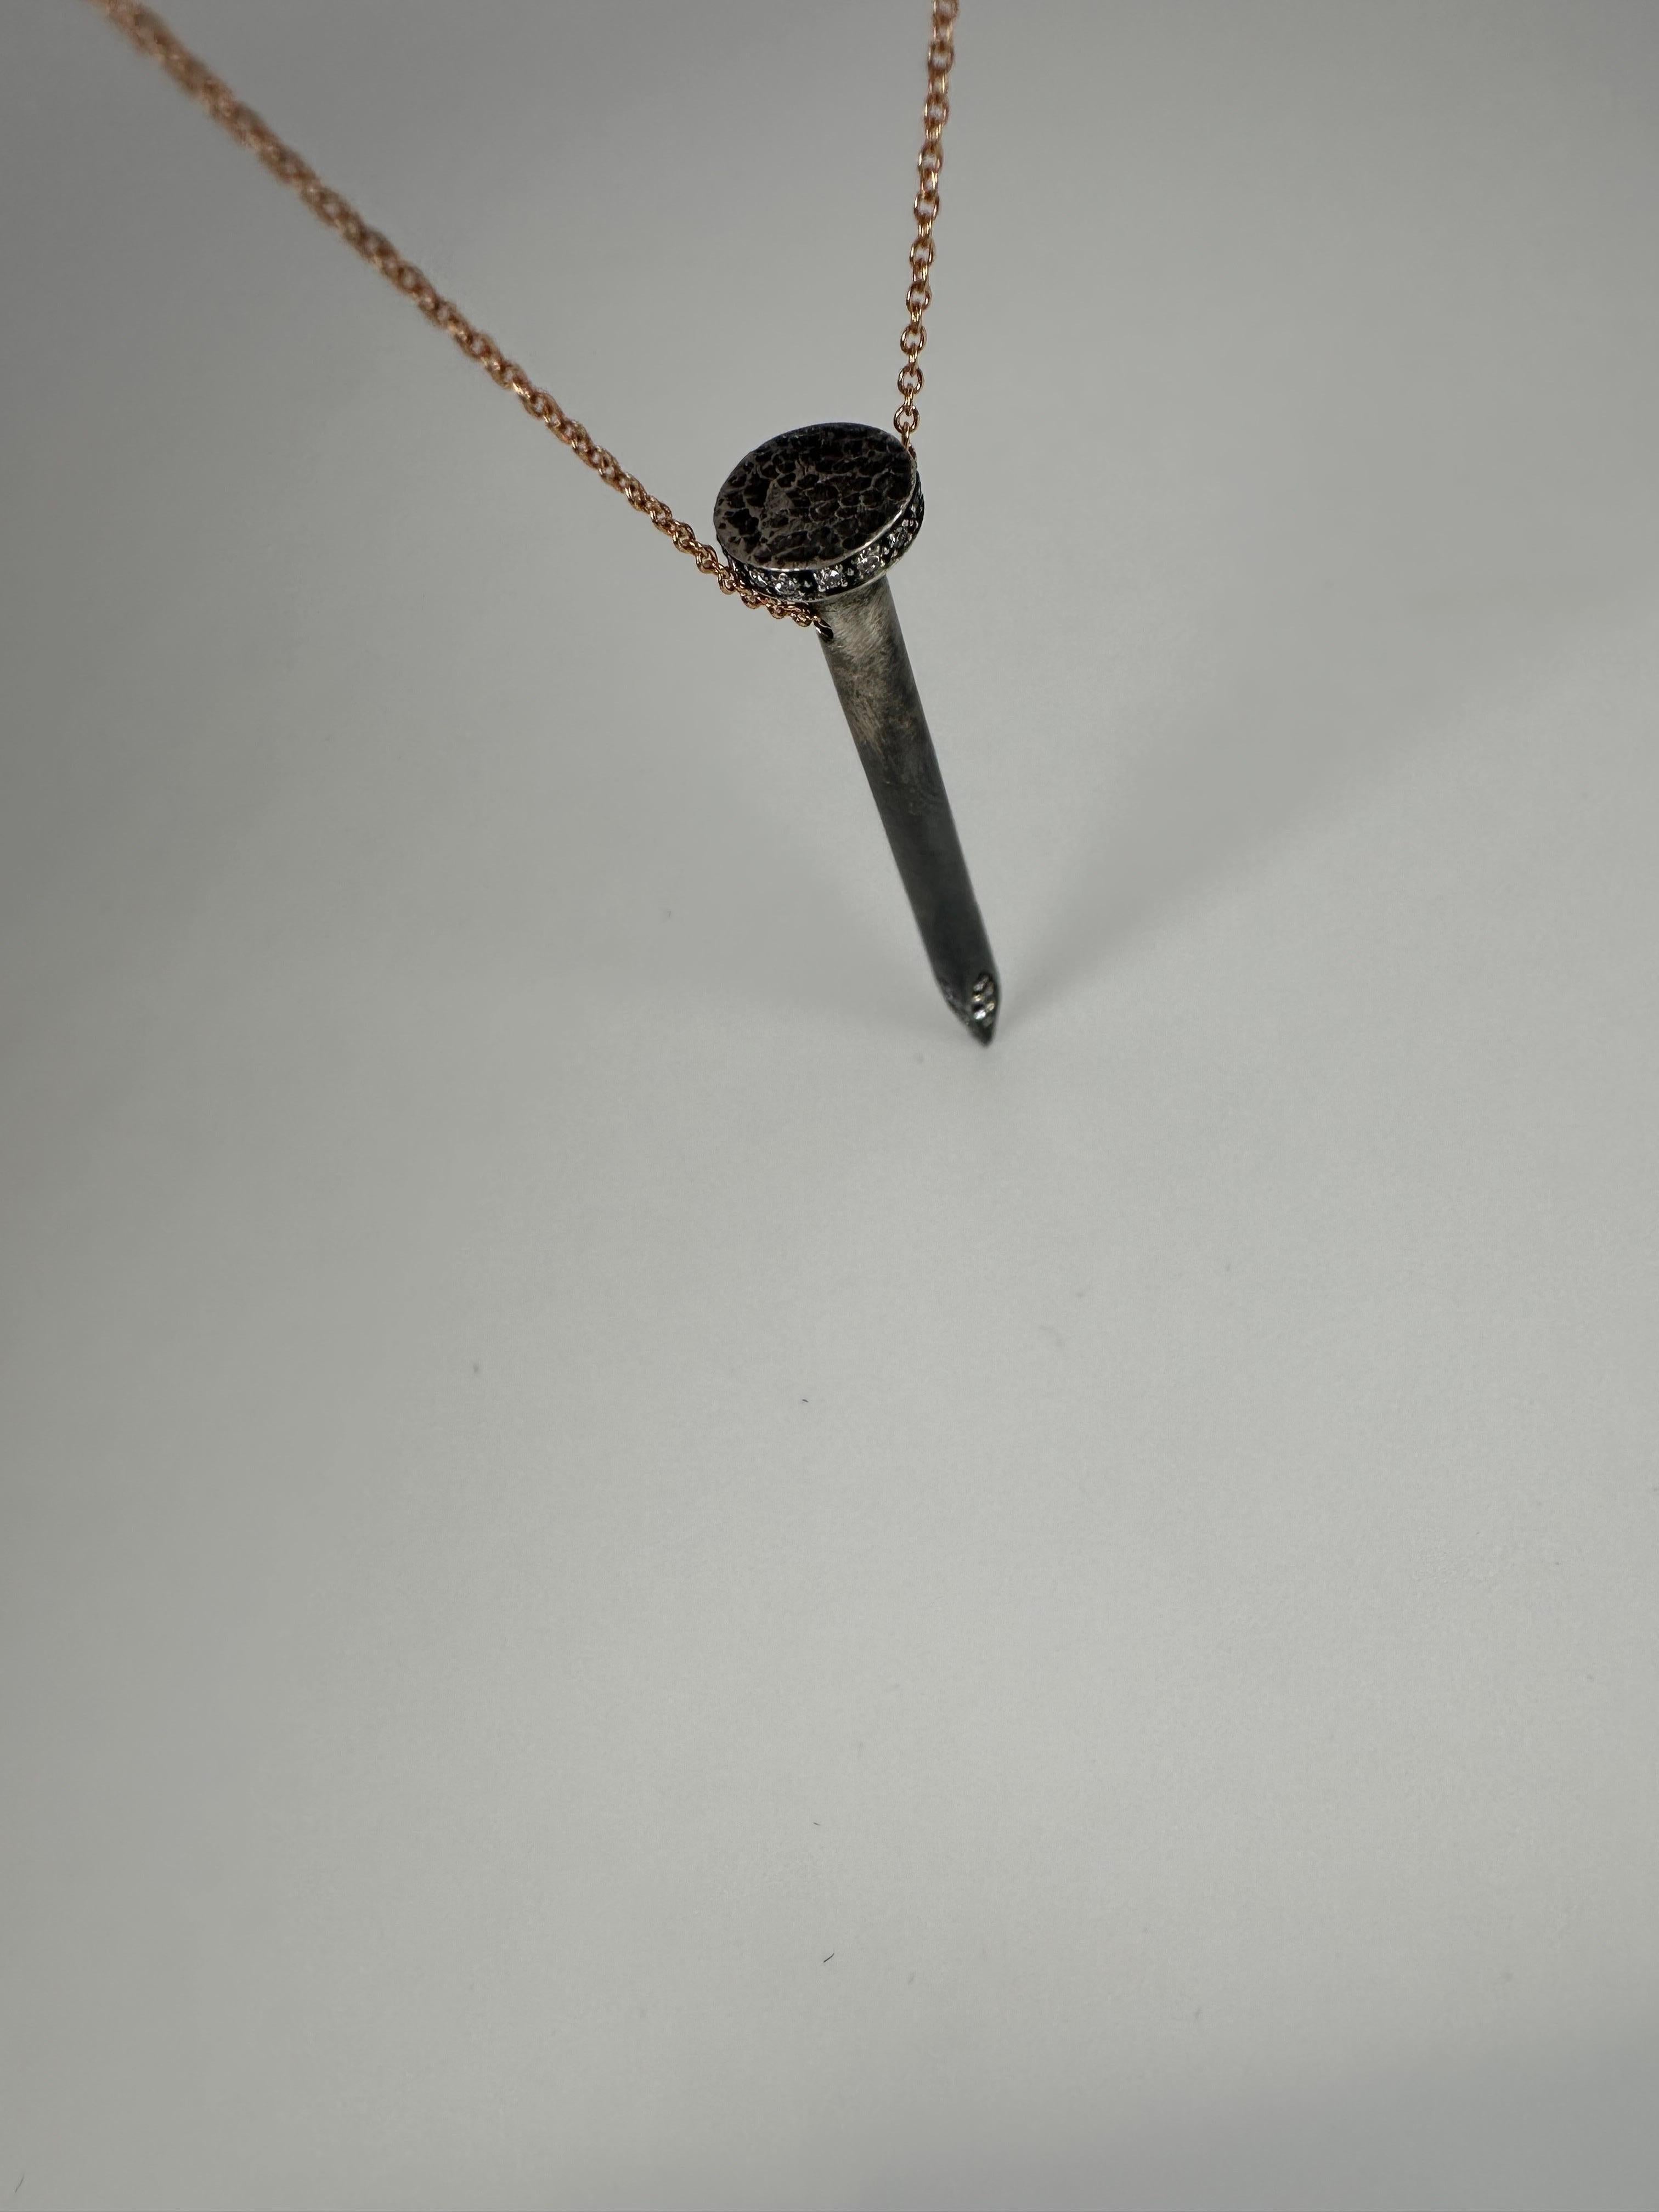 Extraordinary pendant necklace, the nail pendant is made with silver and black gold to resemble a real nail, set with fantastic quality diamonds and finished with 18KT chain. 

GOLD: 18KT gold chainn and 925 silver nail
NATURAL